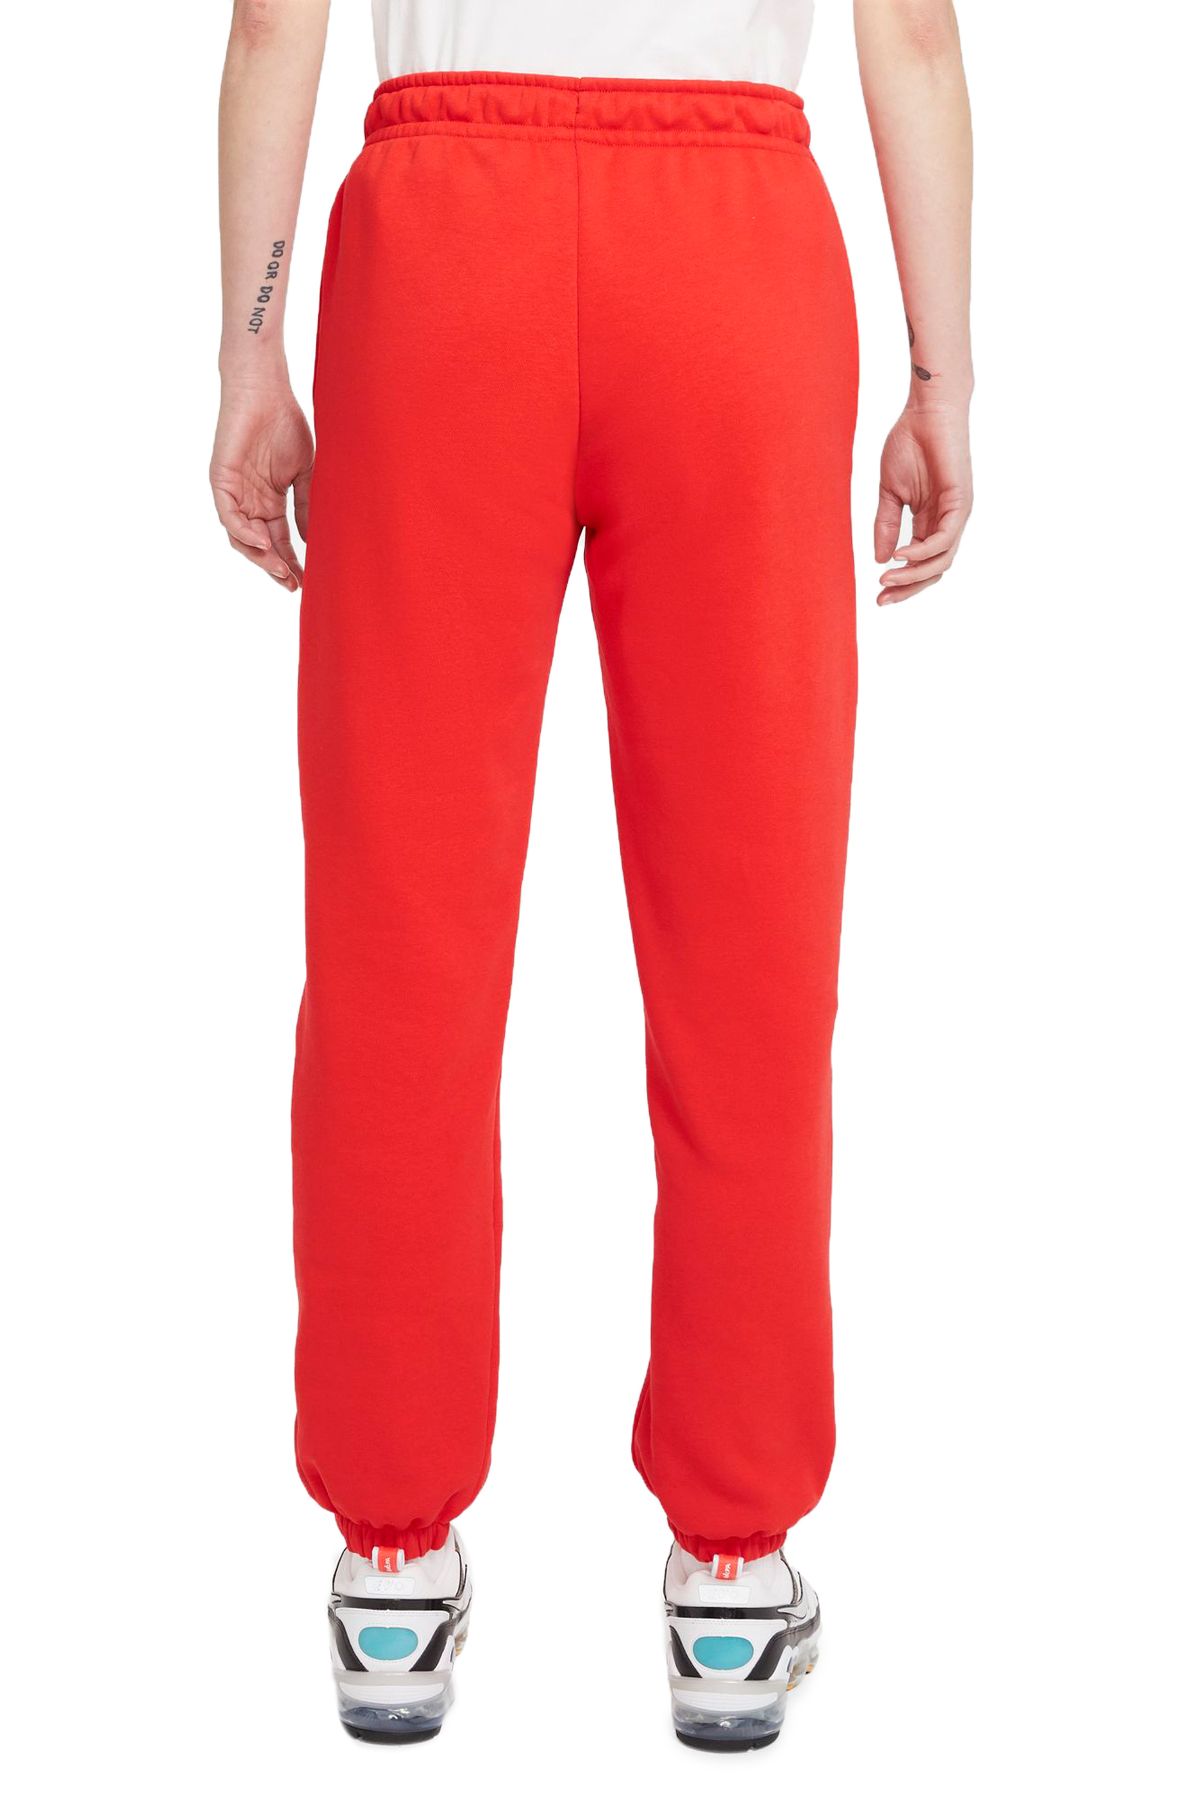  Nike Womens Sportswear Essential Fleece Pants (Cream/Red/Blue,  Small) : Clothing, Shoes & Jewelry